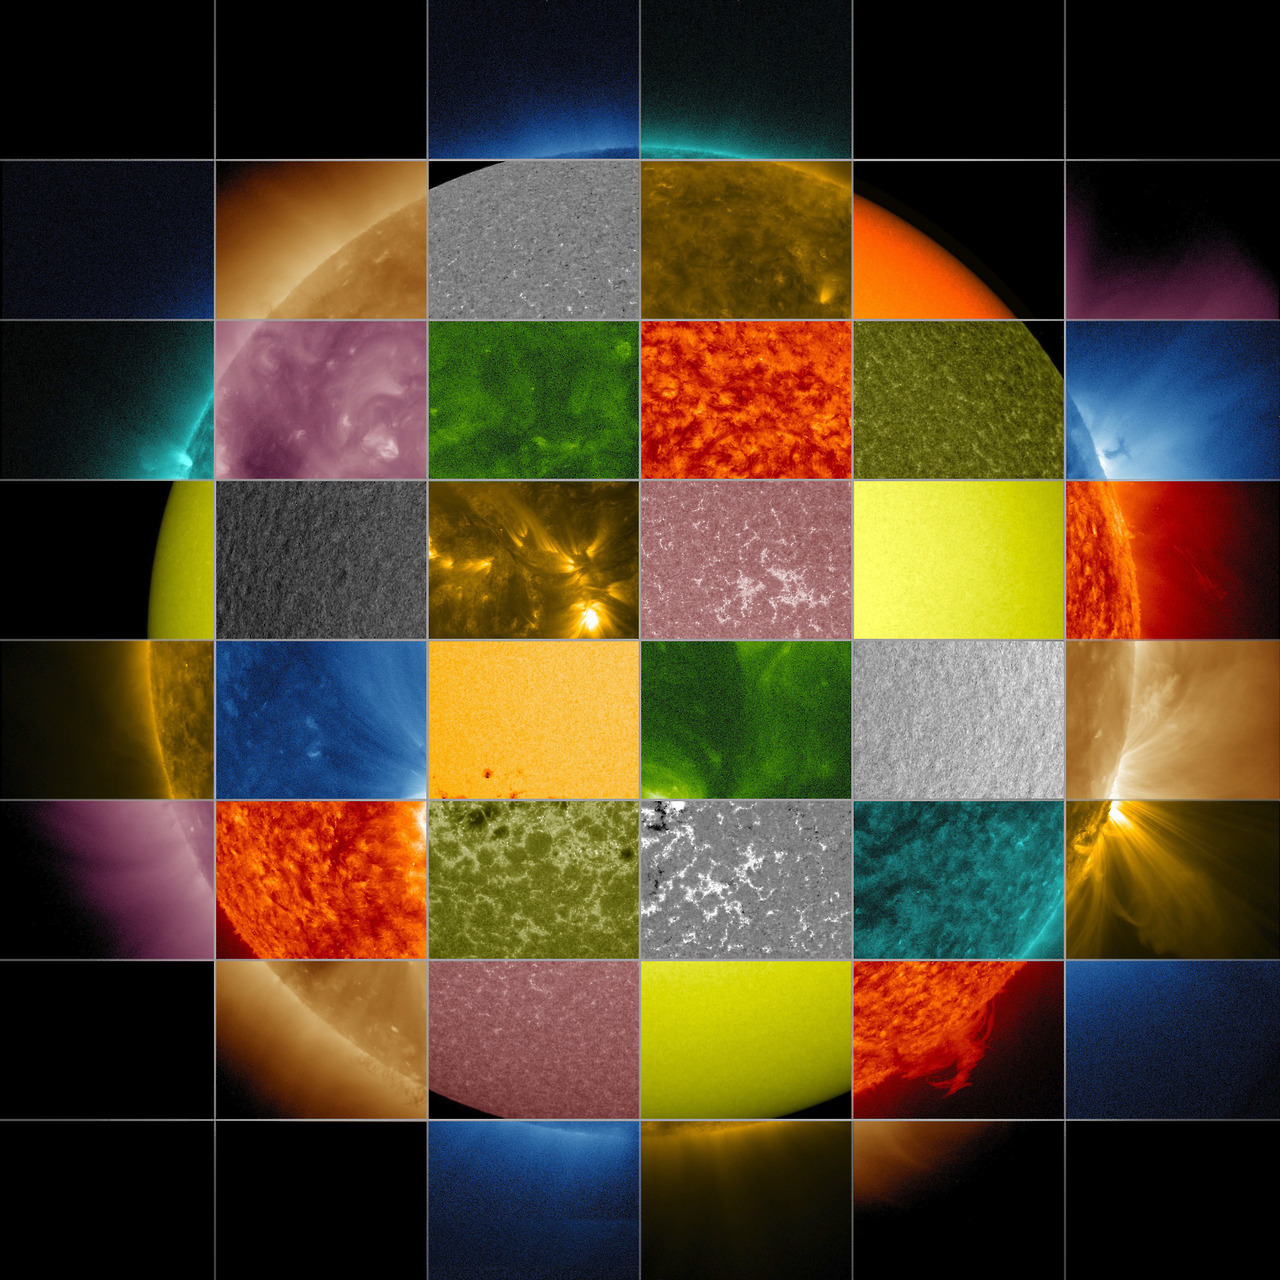 Image description: This collage of solar images from NASA&#8217;s Solar Dynamics Observatory (SDO) shows how observations of the sun in different wavelengths helps highlight different aspects of the sun&#8217;s surface and atmosphere. (The collage also includes images from other SDO instruments that display magnetic and Doppler information.) Credit: NASA/SDO/Goddard Space Flight Center.
Learn more about why NASA scientists observe the sun in different wavelengths.